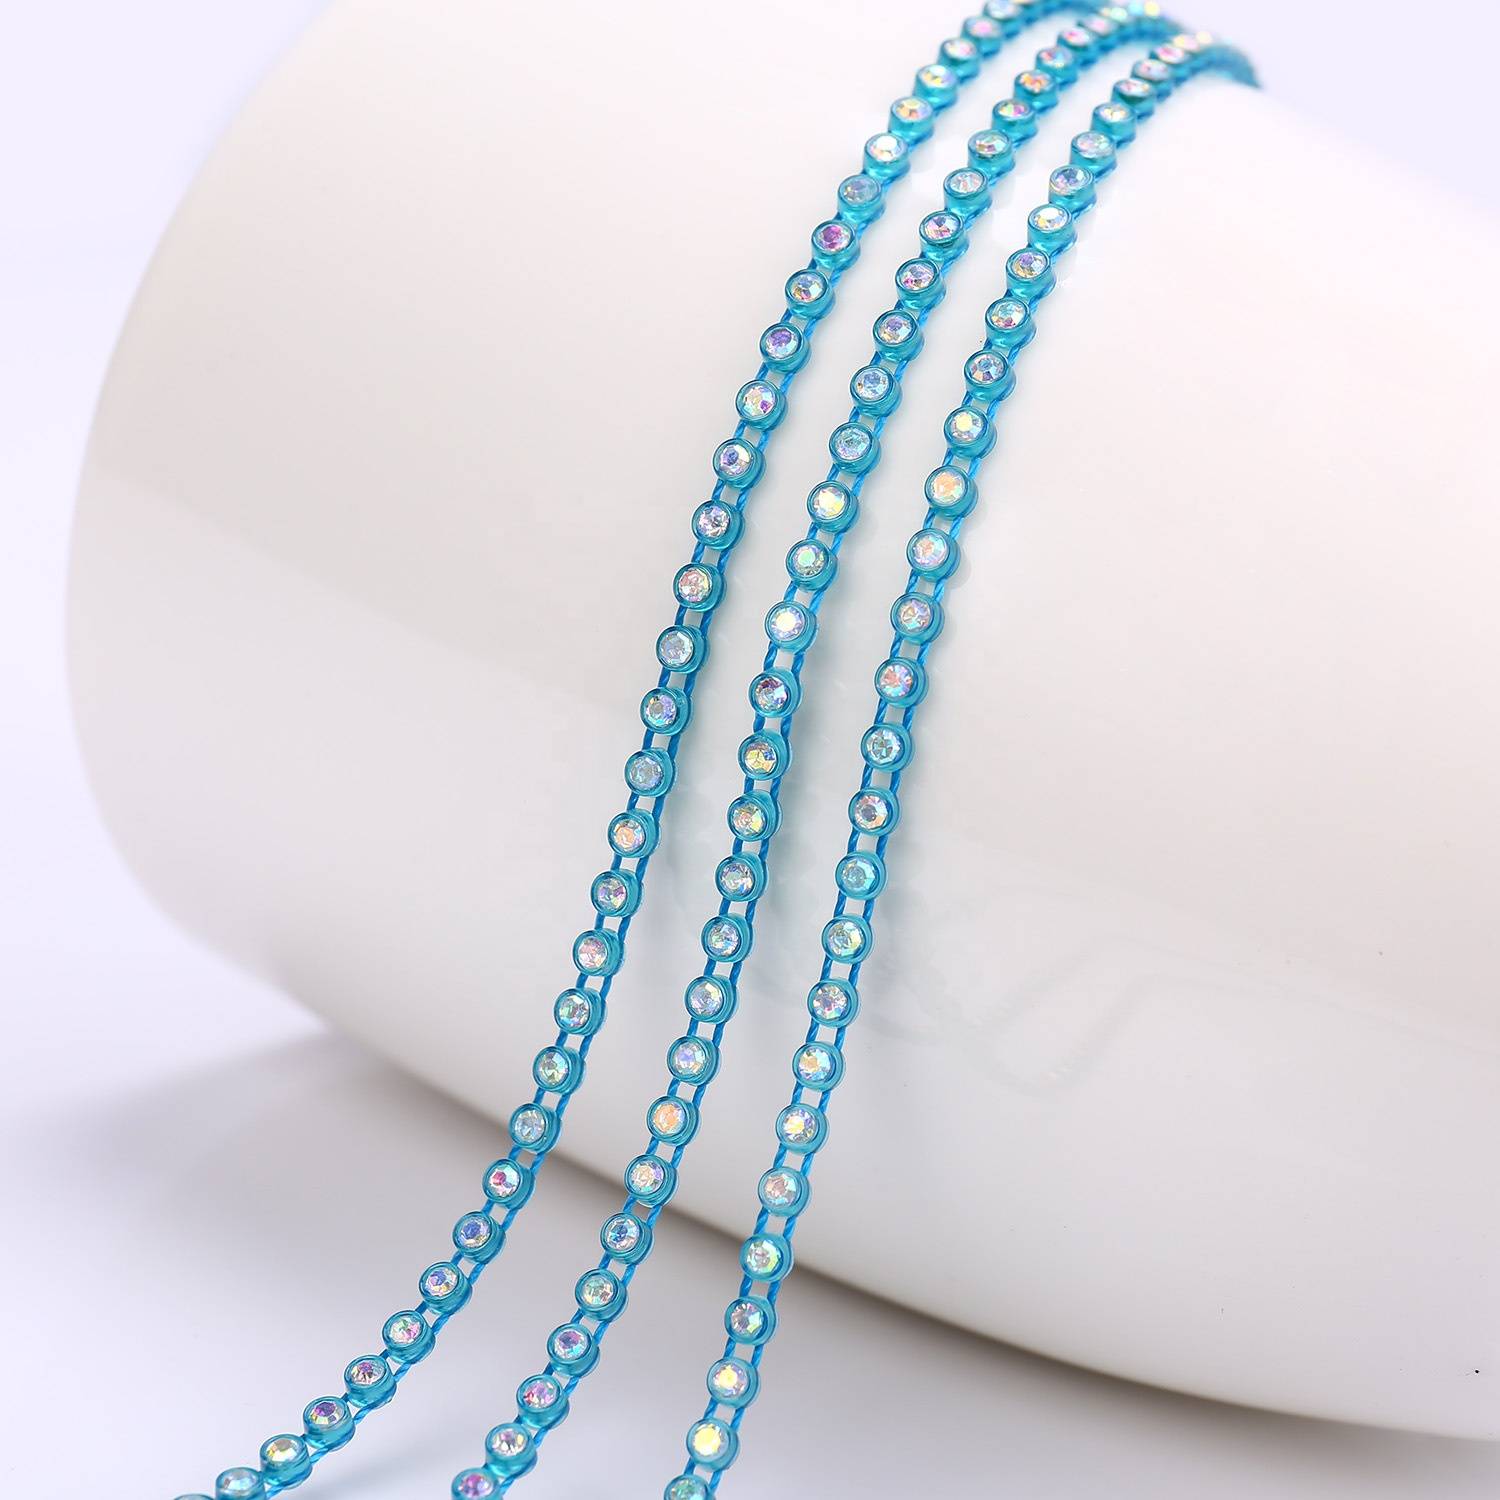 Wholesale High Quality SS6 SS8 Cup Chain Rhinestone Trim by the Yard